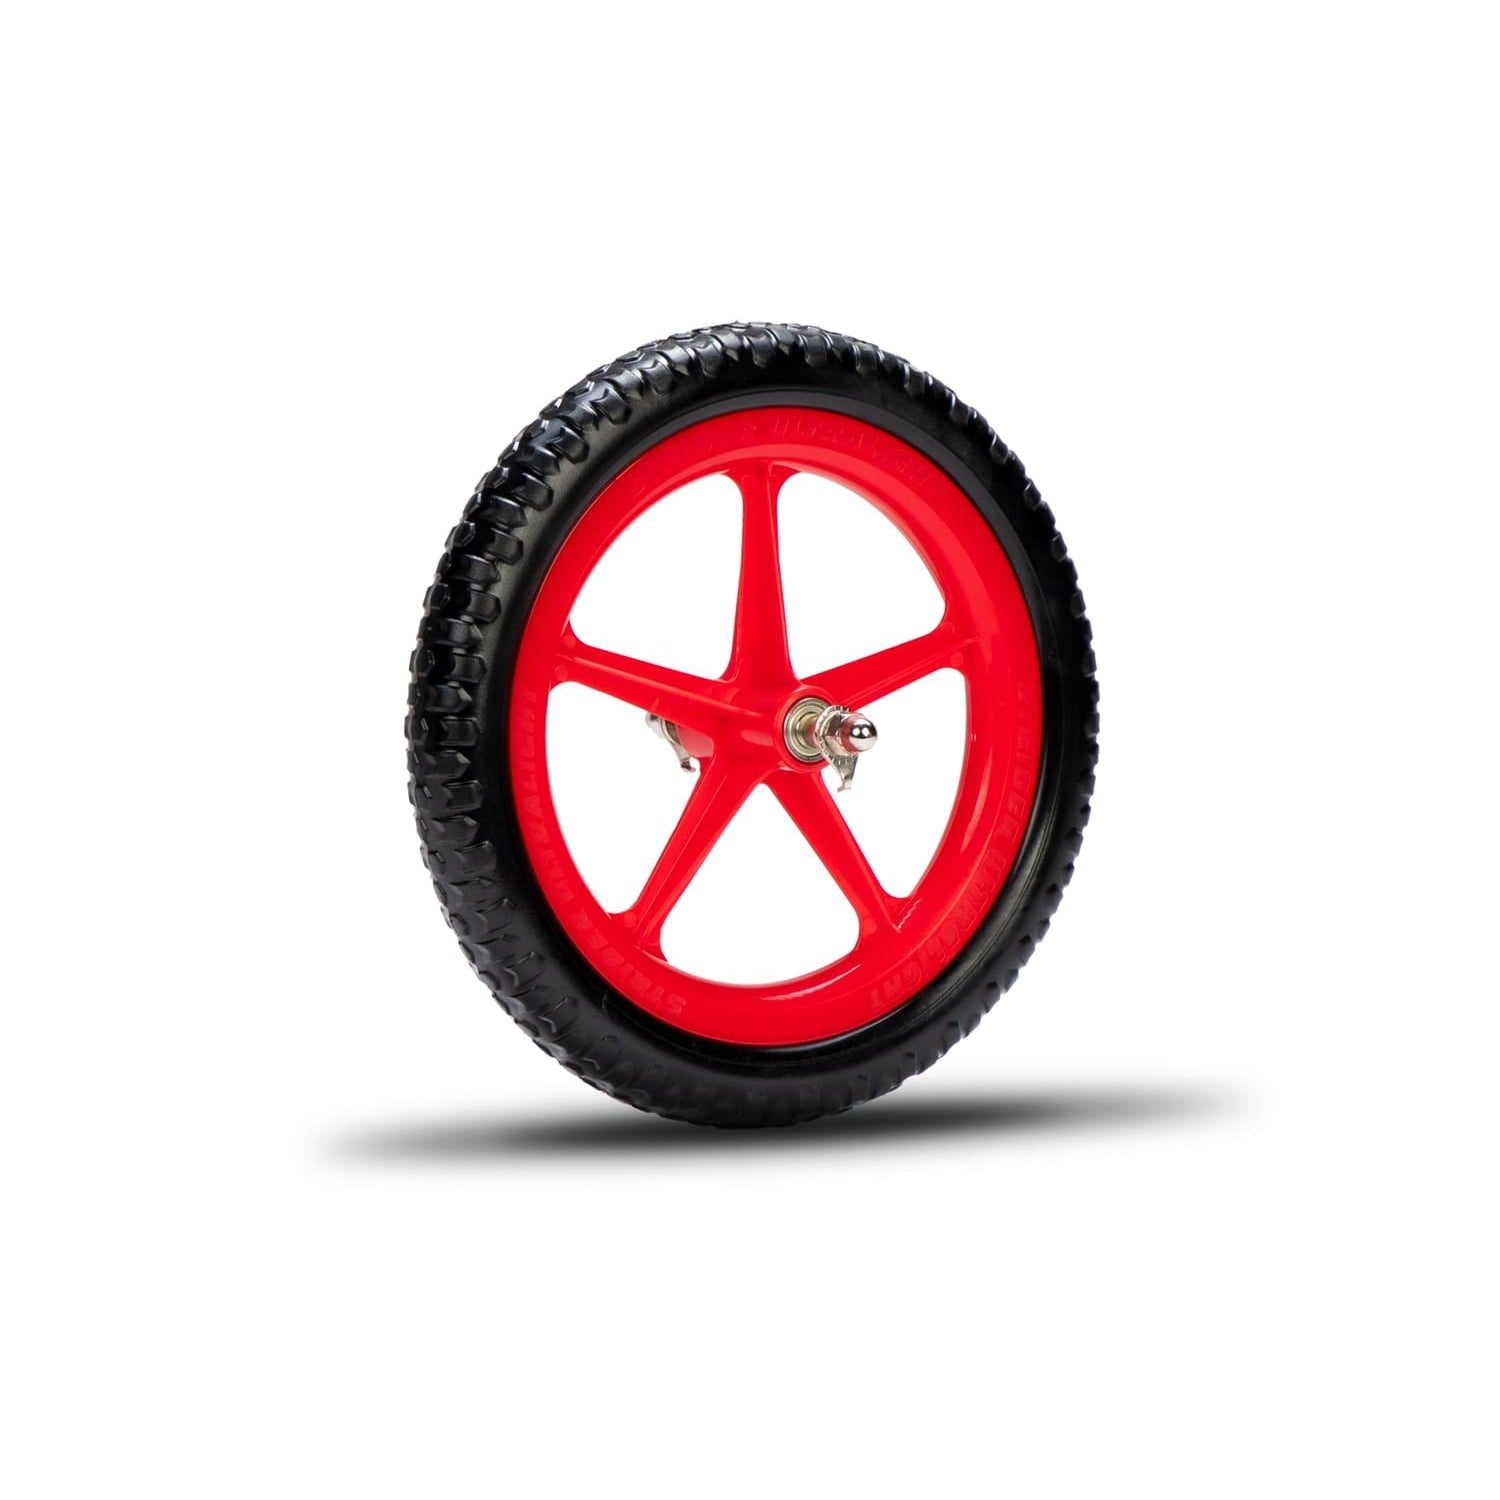 Wheel Woolies Small 8 Red/Black head - Creative Cycle Concepts